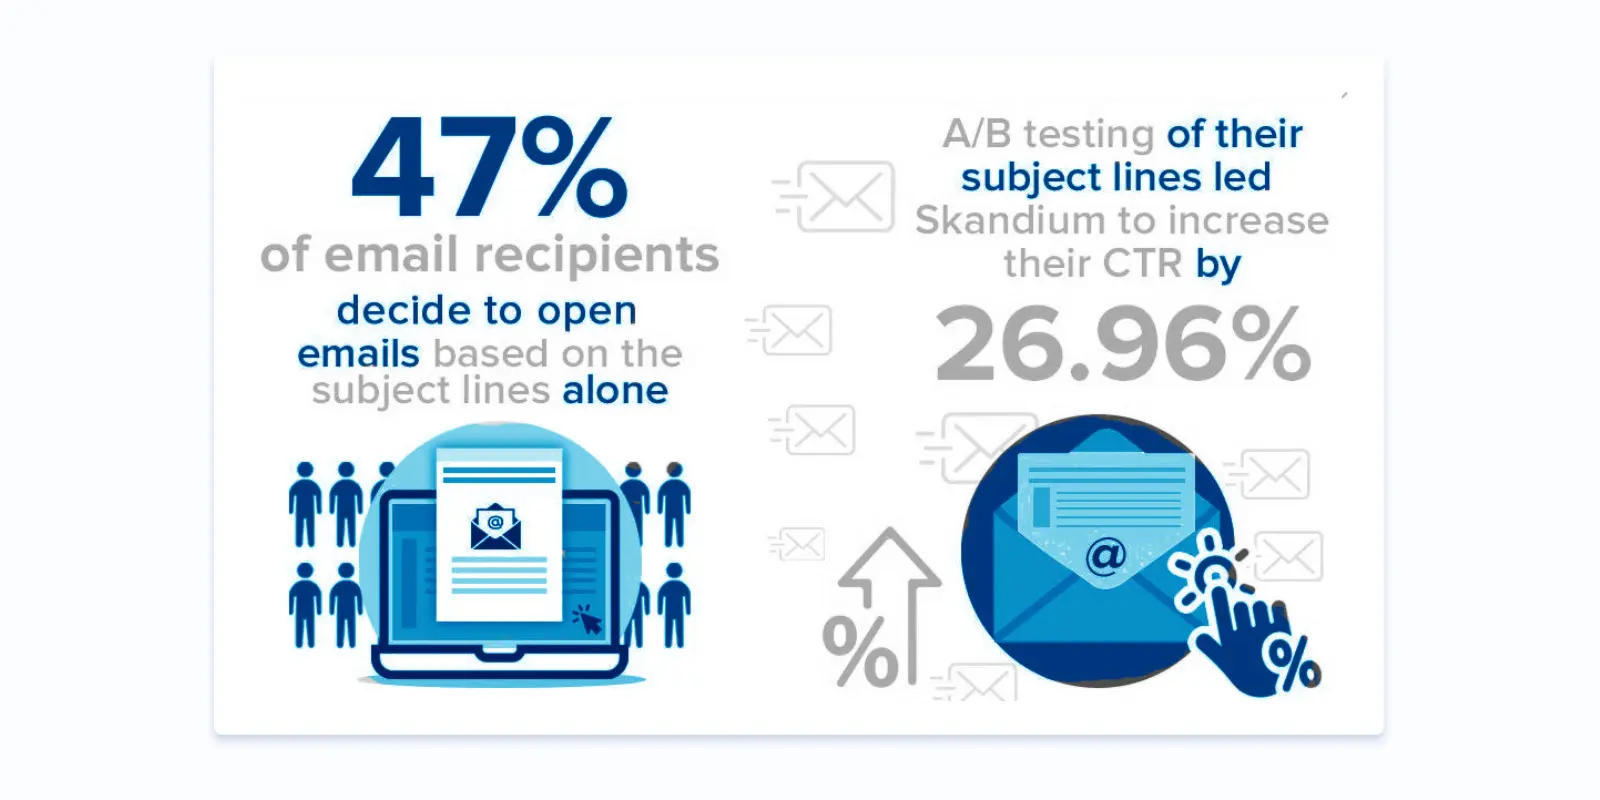 Statistics on subject lines, including the fact that 47% of email recipients open emails based on subject line alone.